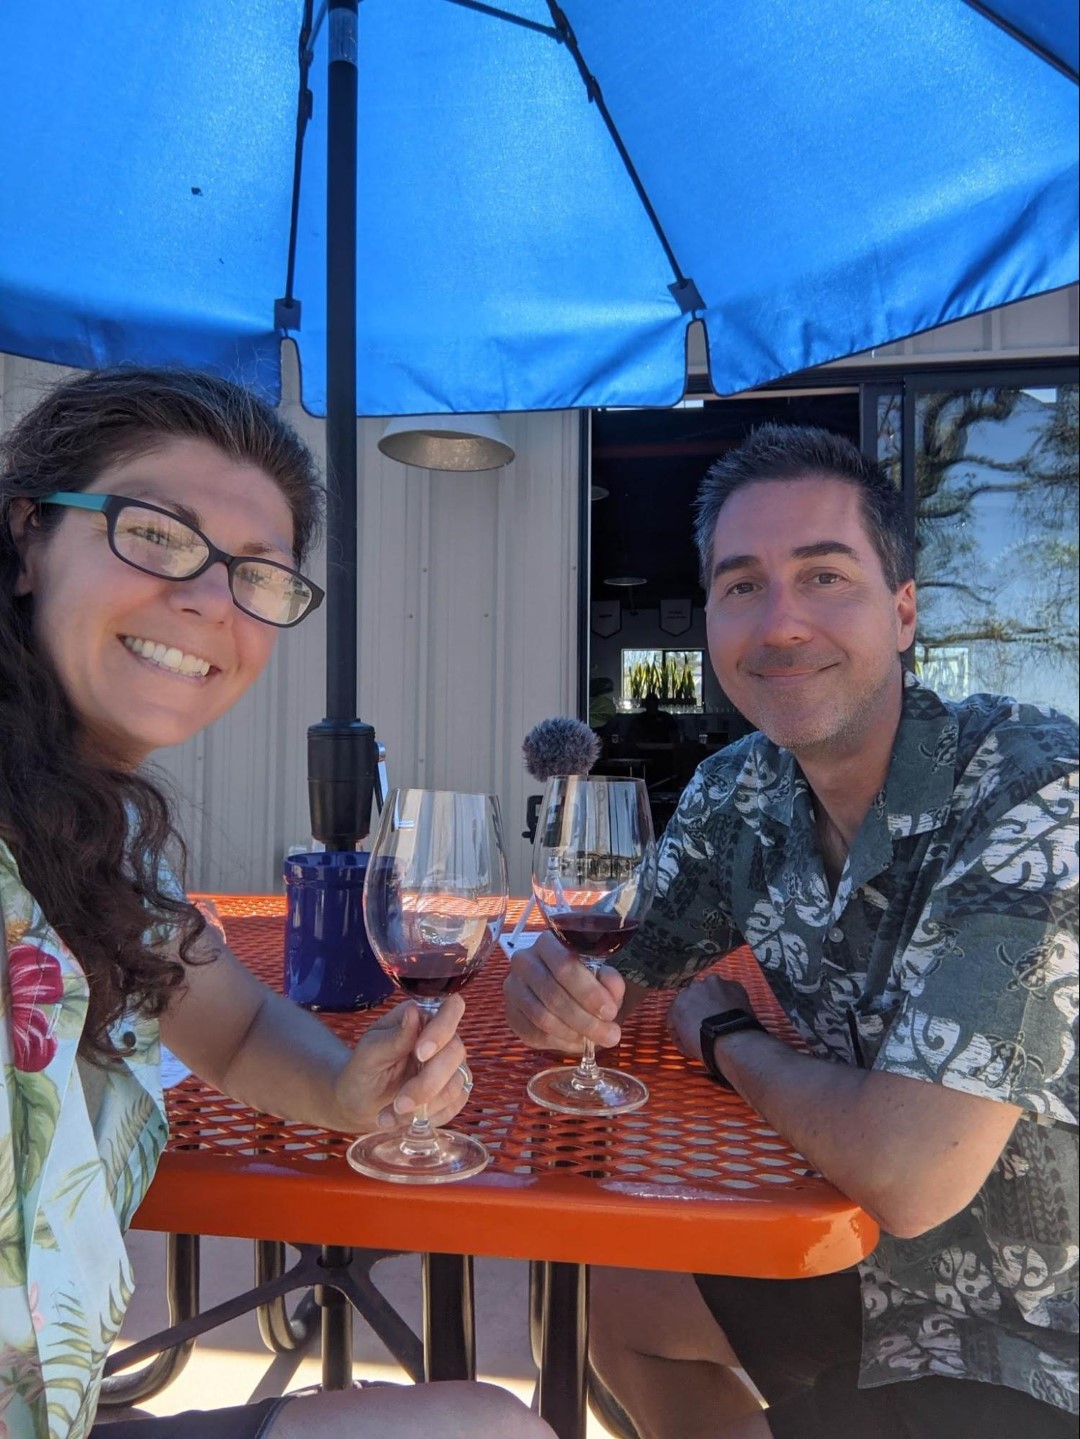 Mel & Jay wine tasting at one of the tasting rooms in Tin City, Paso Robles, CA